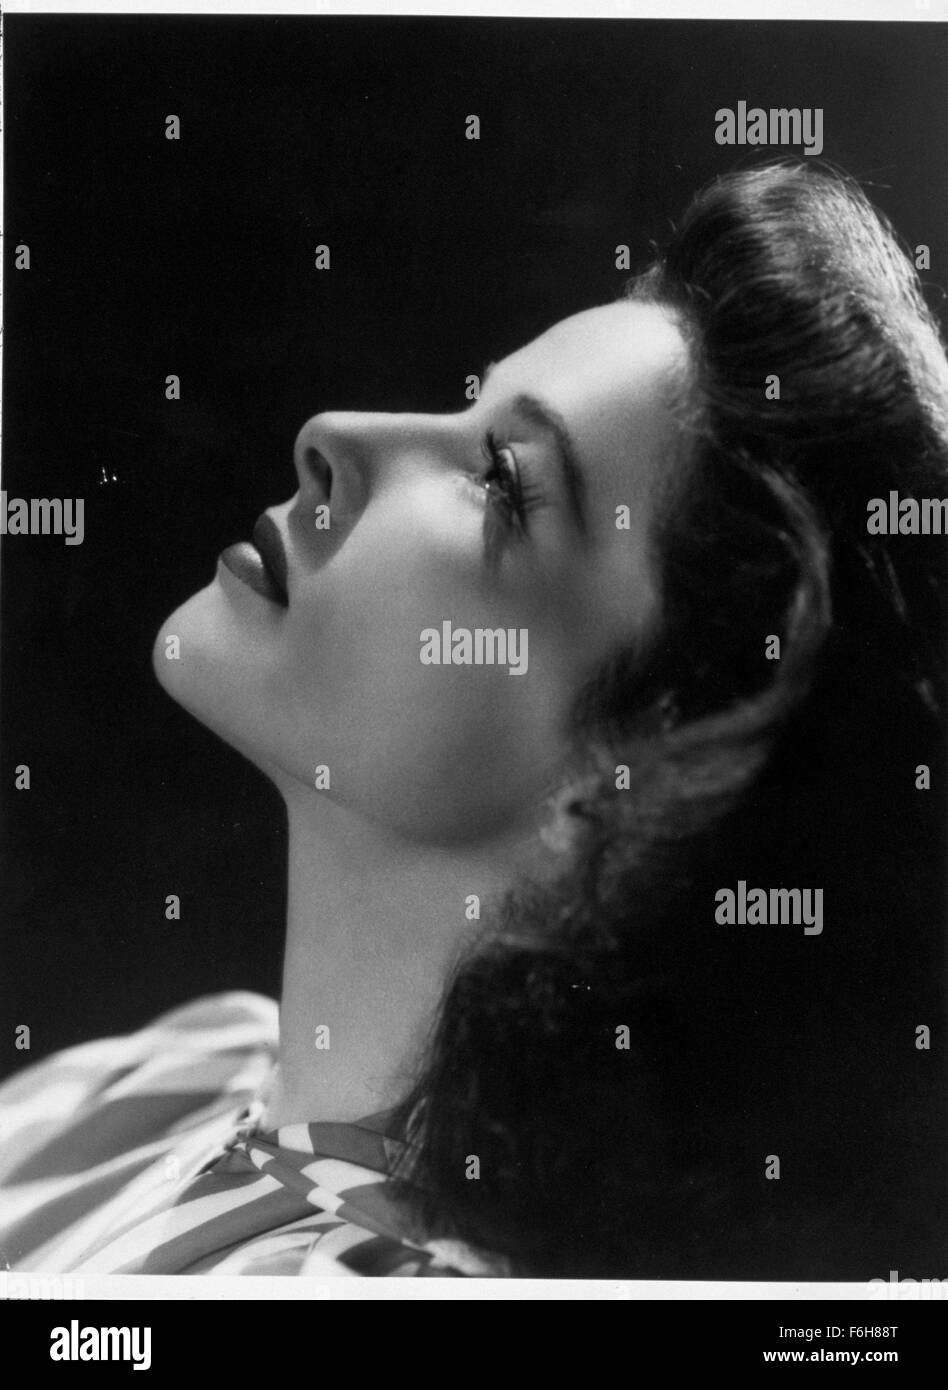 1942, Film Title: WOMAN OF THE YEAR, Director: GEORGE STEVENS, Studio: MGM, Pictured: KATHARINE HEPBURN, PROFILE, HEAD BACK, PORTRAIT, STUDIO, LOOKING UP. (Credit Image: SNAP) Stock Photo